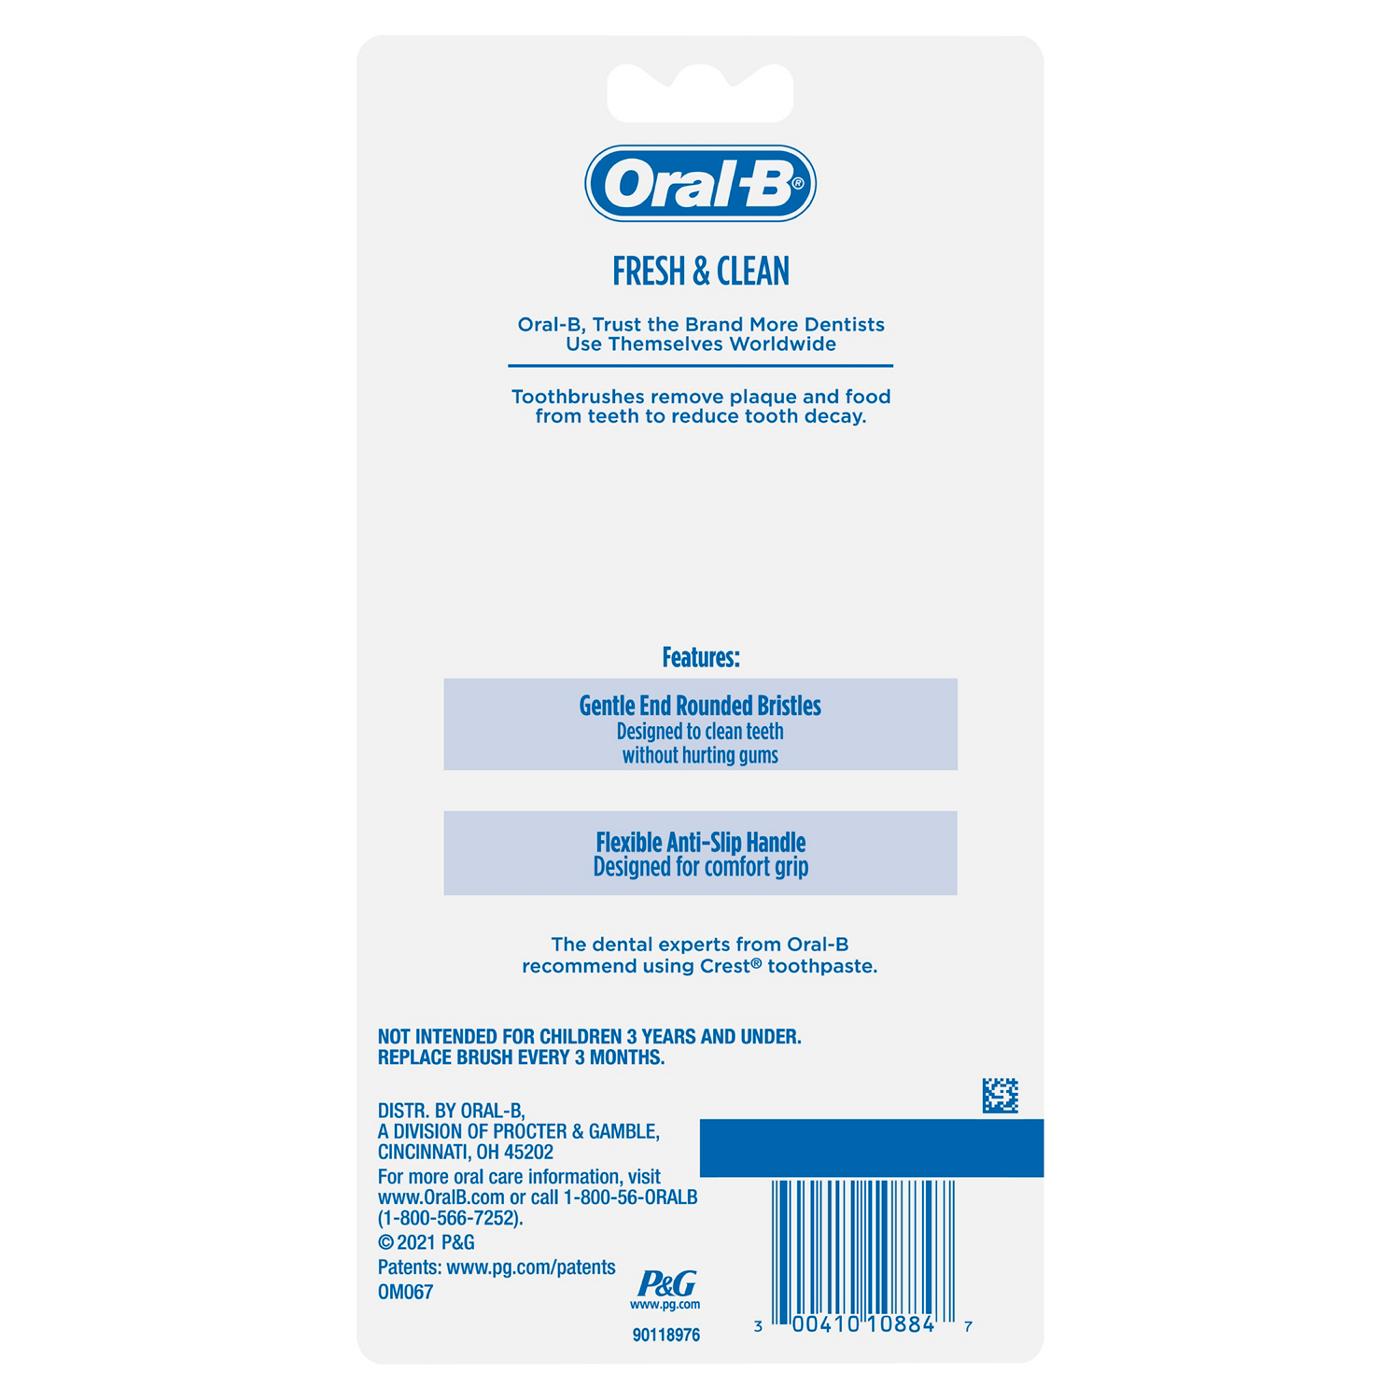 Oral-B Fresh & Clean Toothbrushes - Soft; image 3 of 6